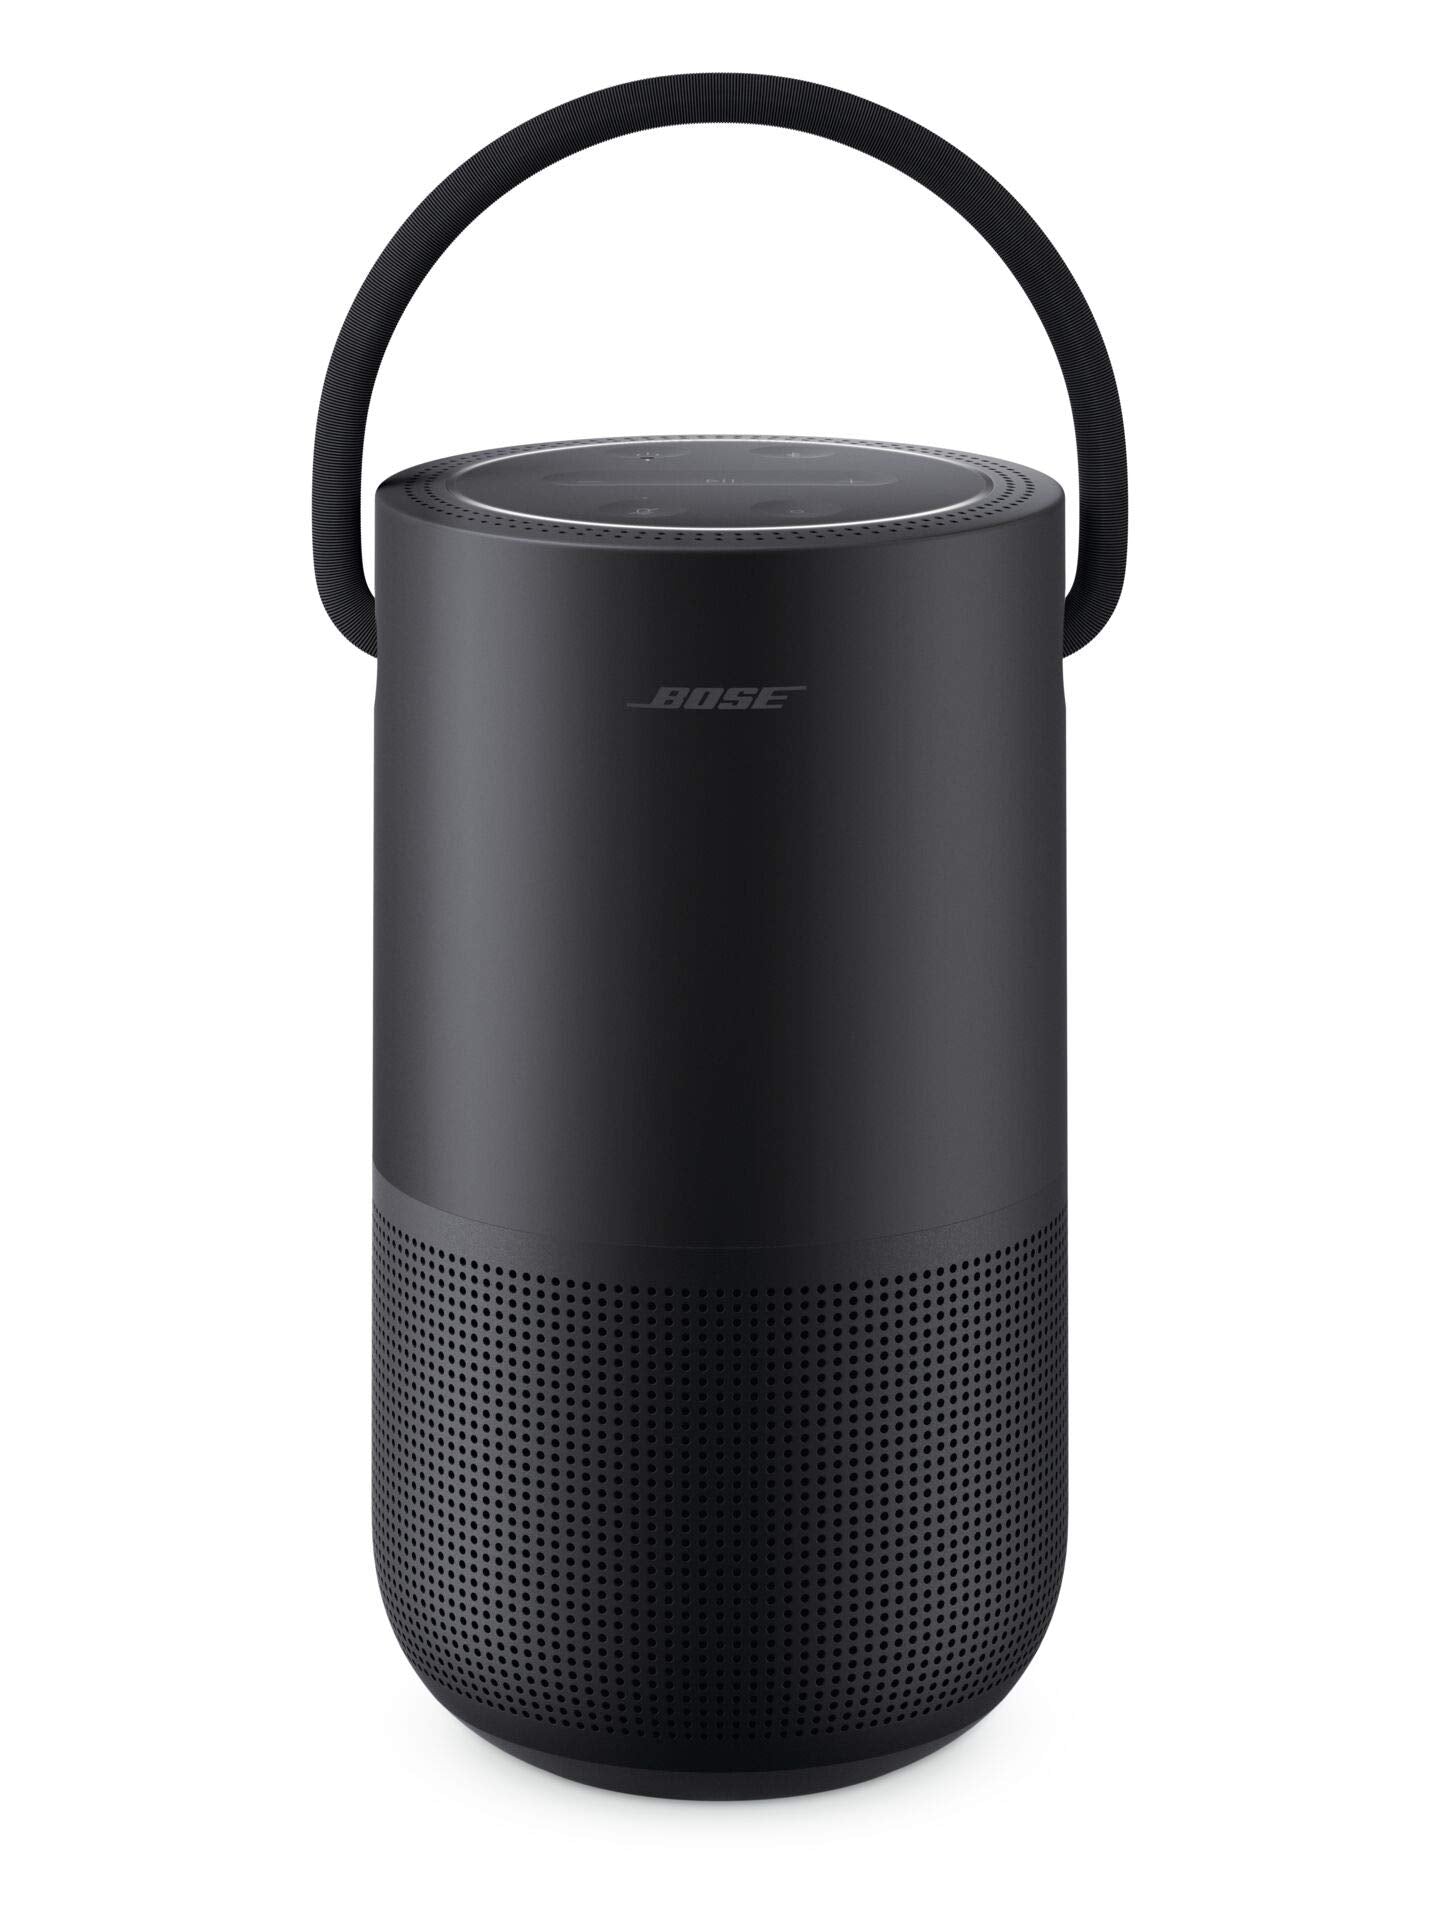 Bose Portable Home Speaker Black | Speakers & Home Theaters | Halabh.com